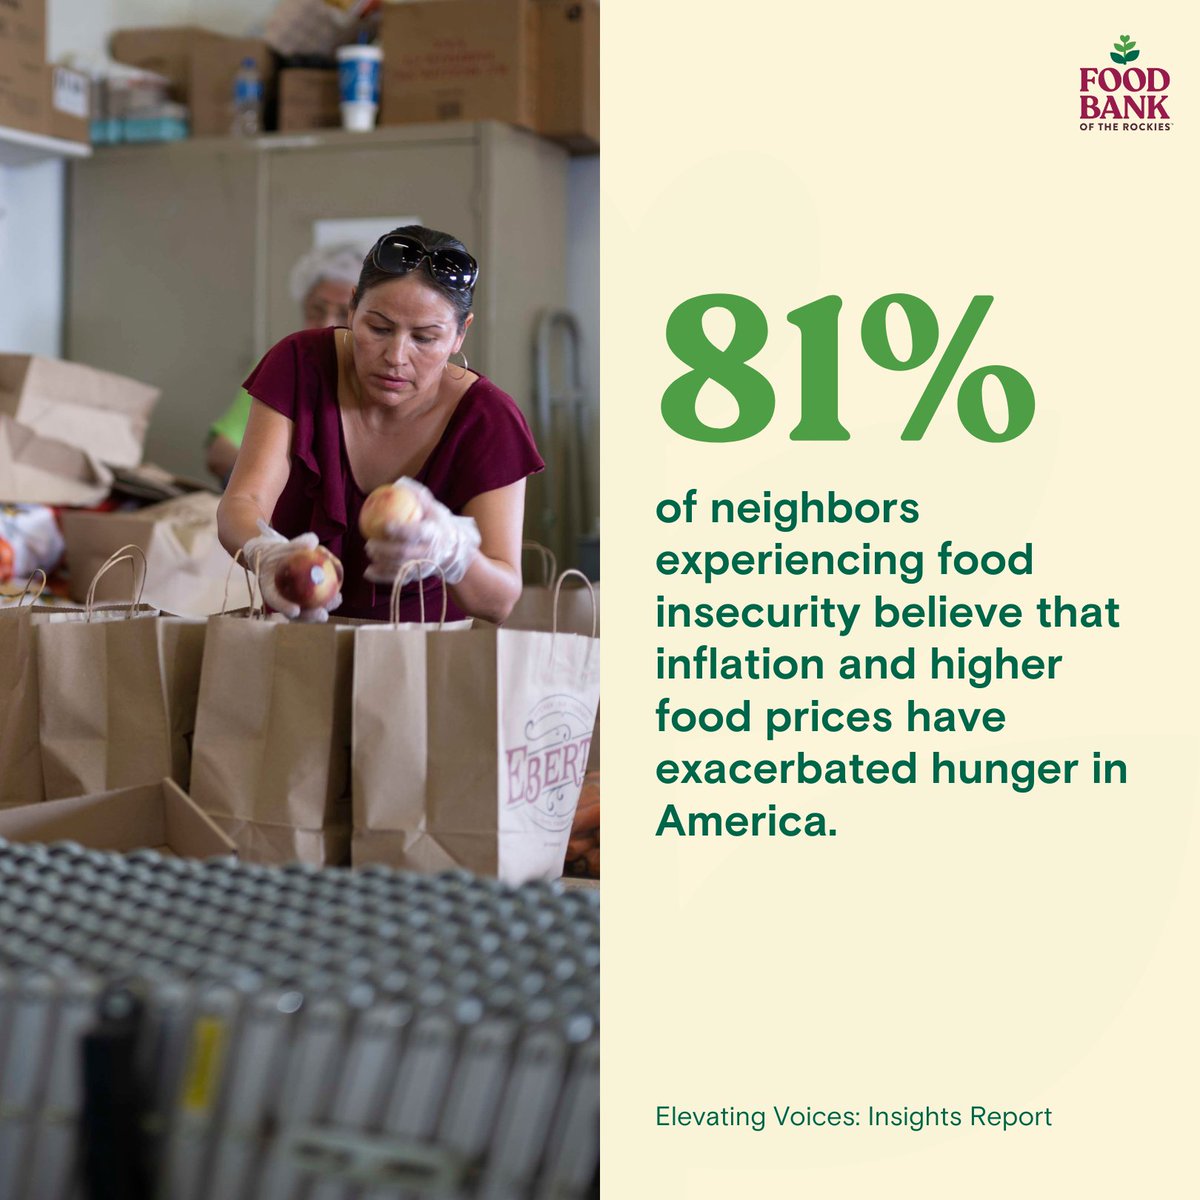 No one should have to worry about whether they can put food on the table and pay their bills at the same time. If you or someone you know needs help with food, please don't hesitate to visit our website at foodbankrockies.org/find-food. We are here to support you however we can.